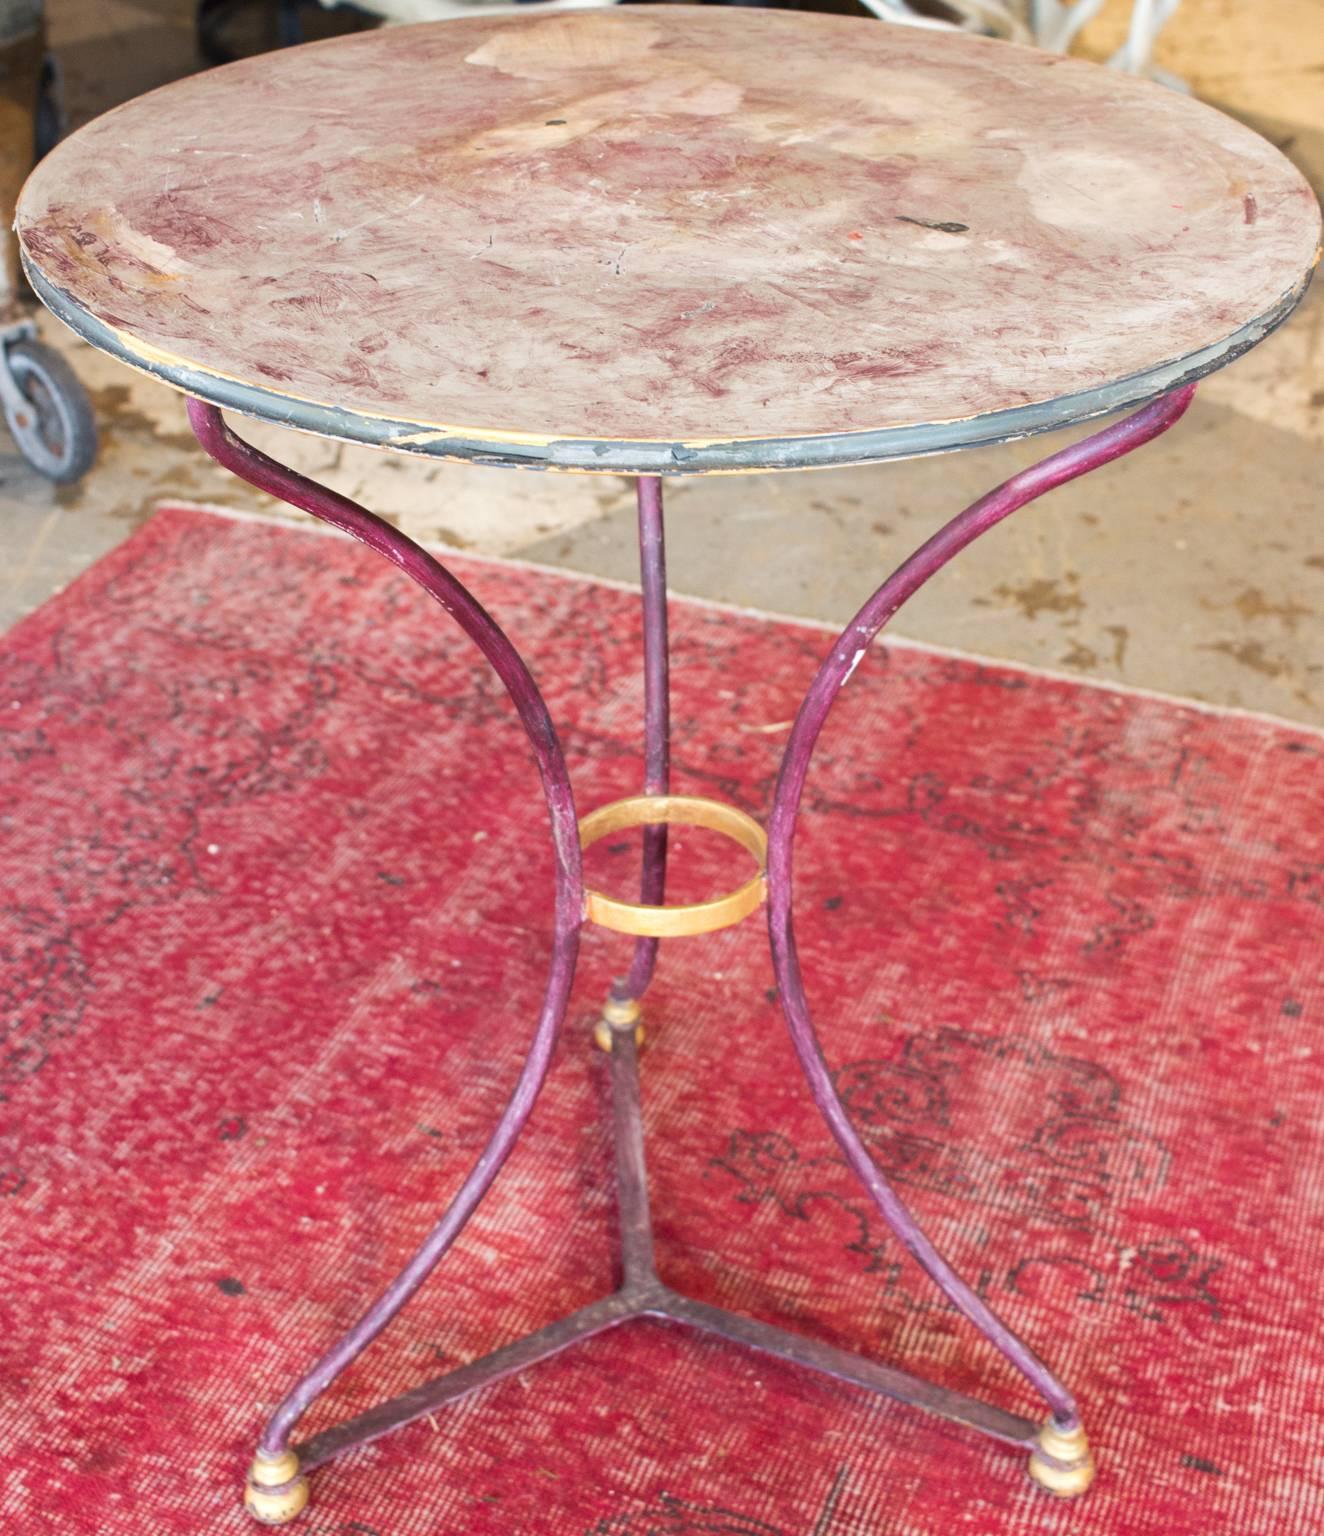 This charming bistro table was found in Northern France. It is metal, but has been painted in a warm purple with gold accents. This table can be used indoors or out and the distressed finish only adds to its charm. Measures 29